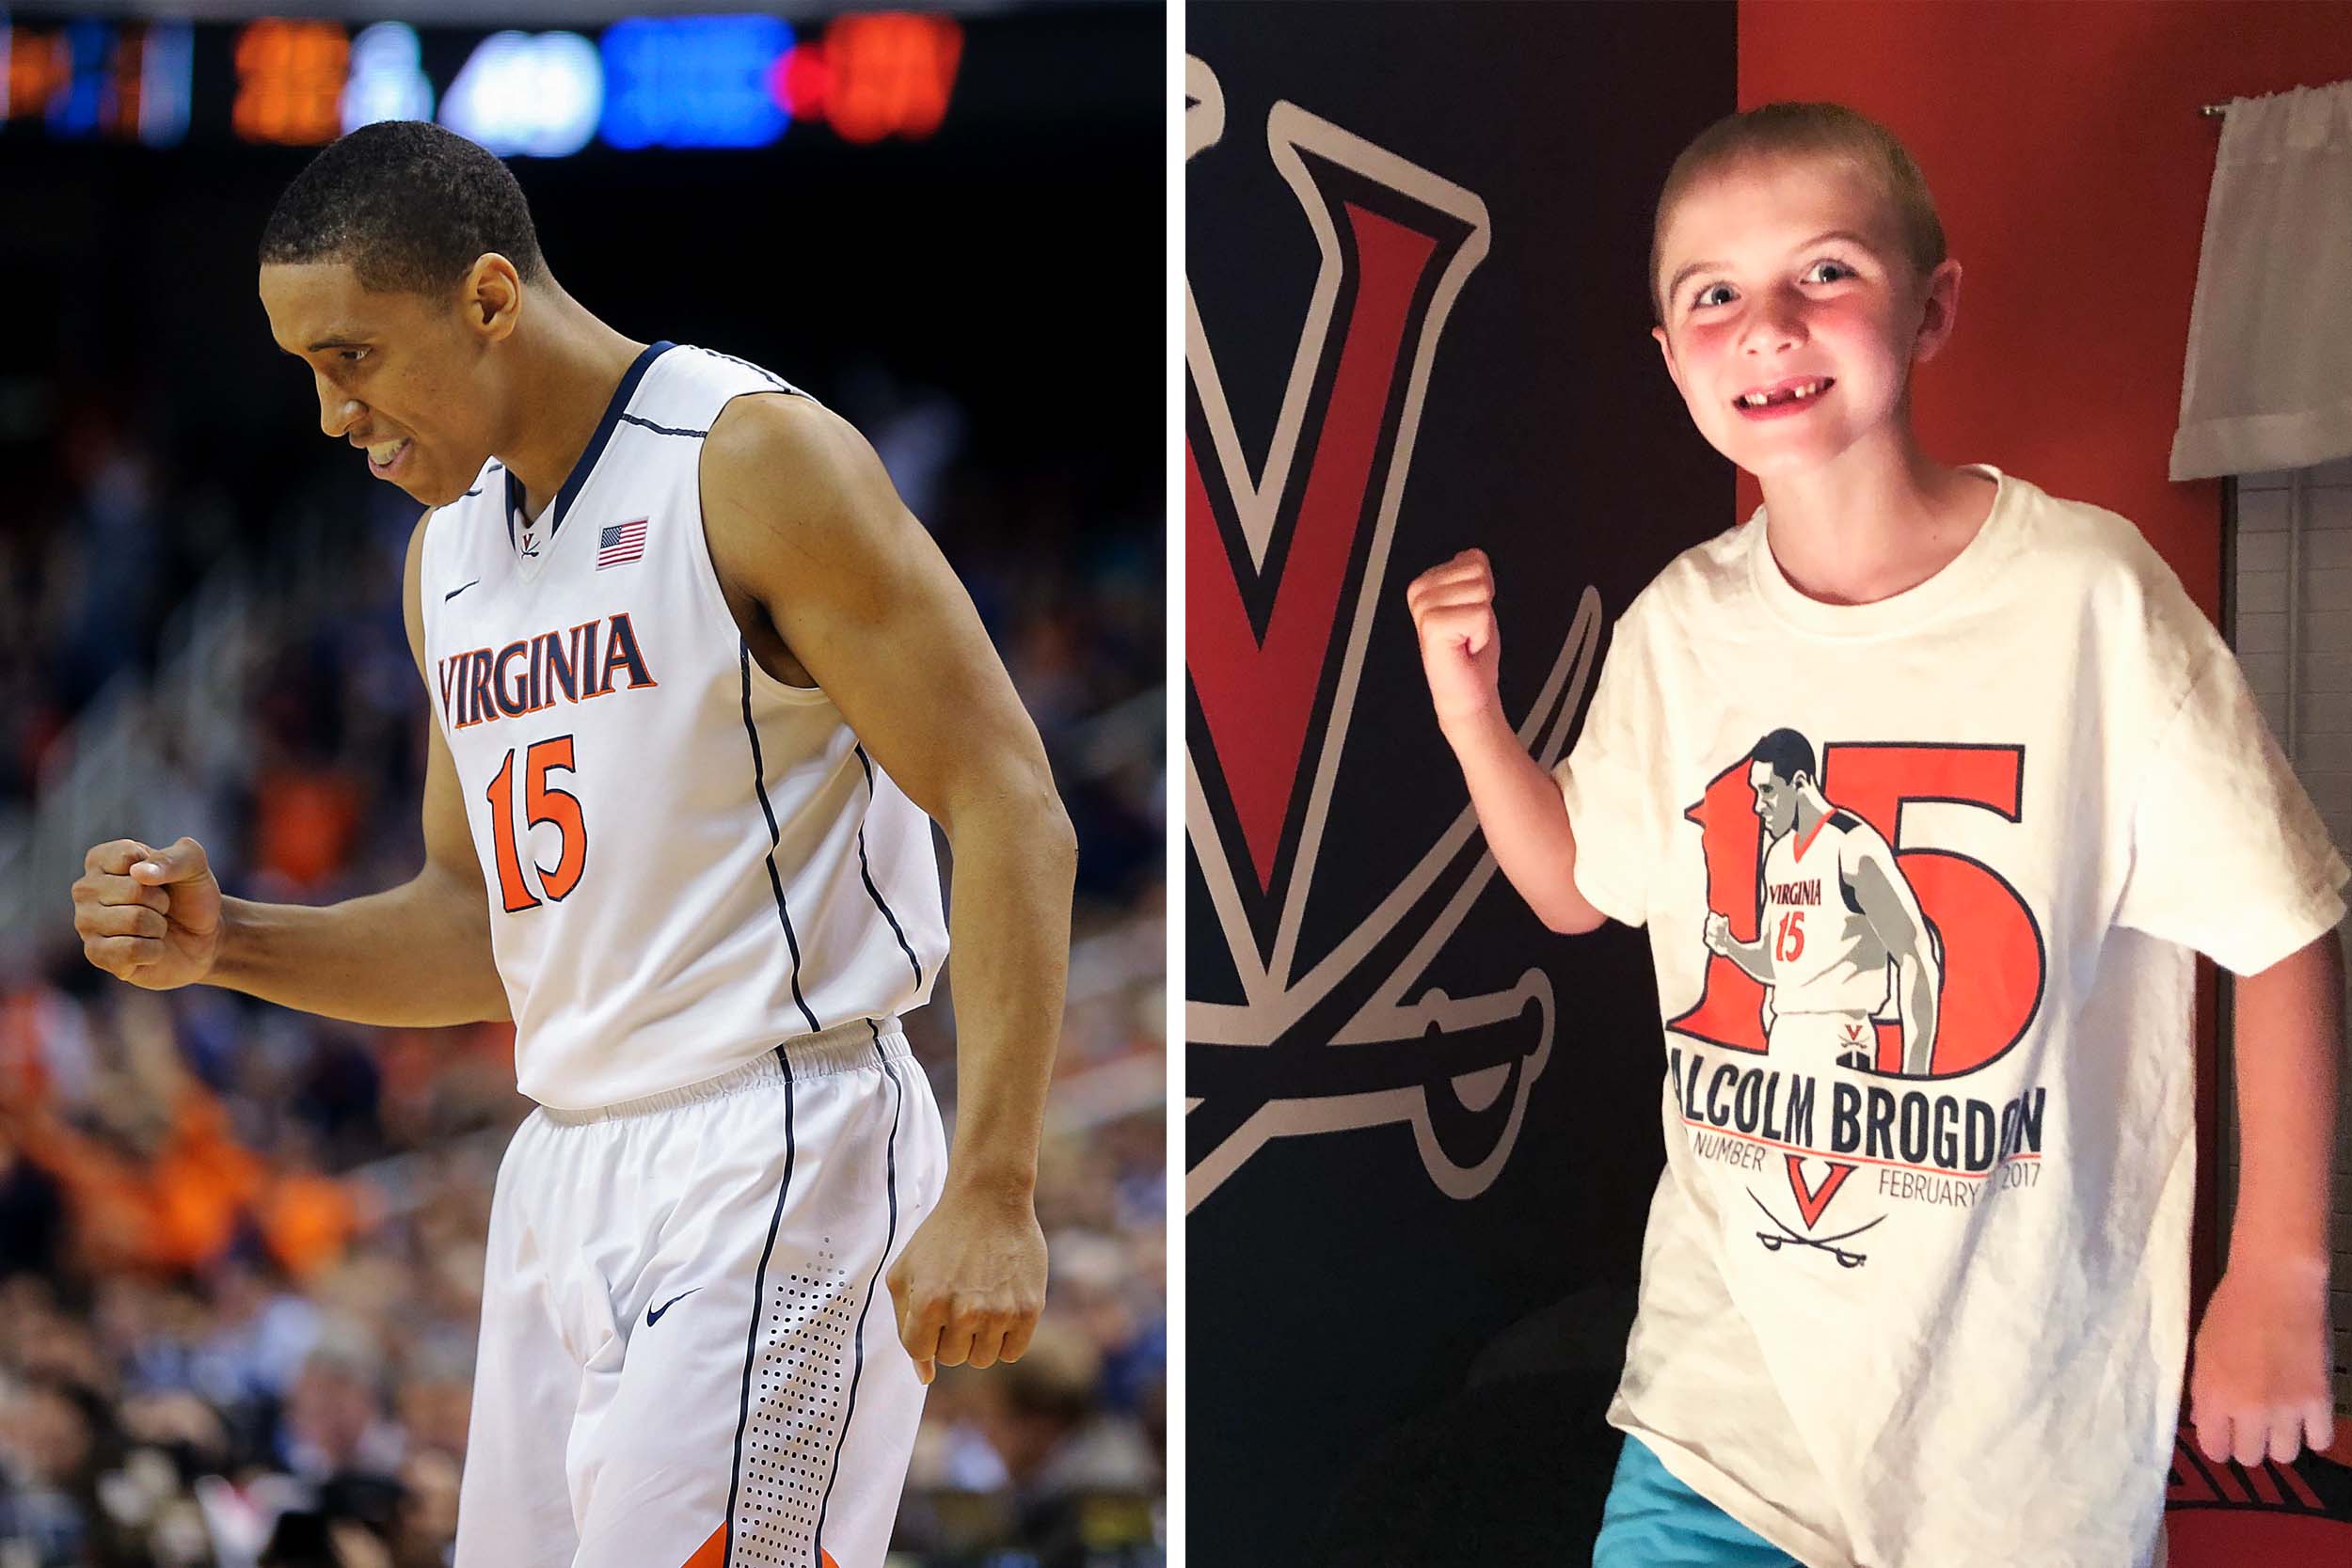 Left: UVA mens basketball player making a fist after making a shot Right: boy recreating the photo on the left